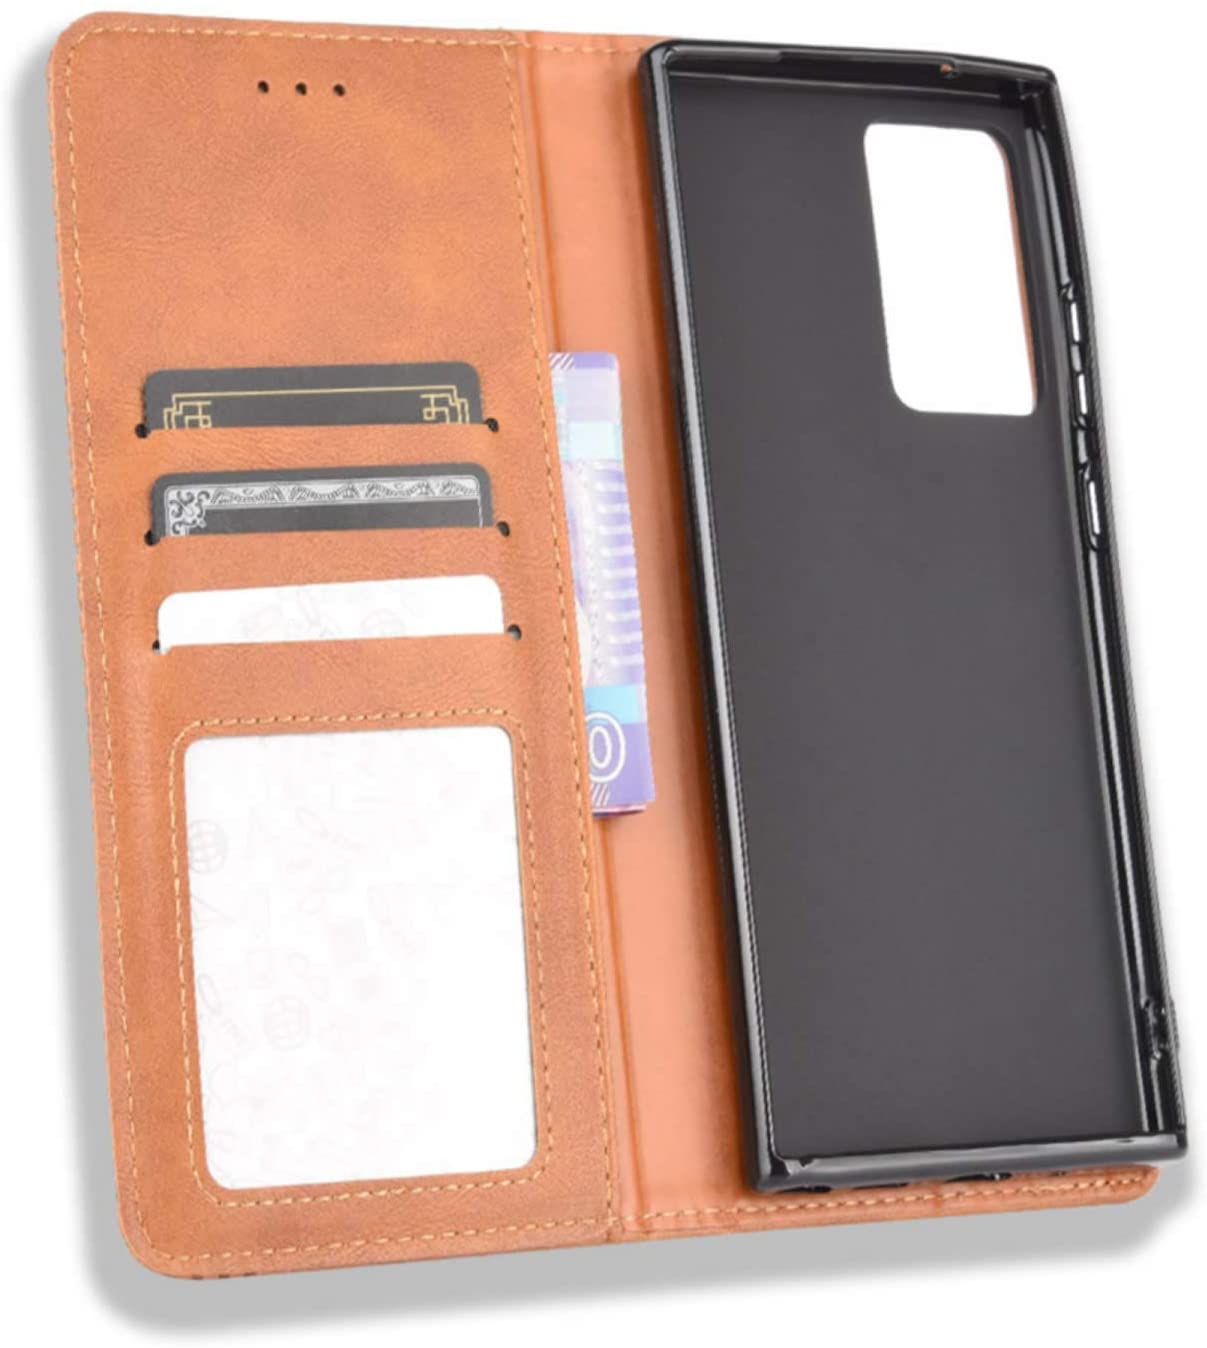 Samsung Galaxy Note 20 Ultra 360 degree protection leather wallet flip cover by excelsior